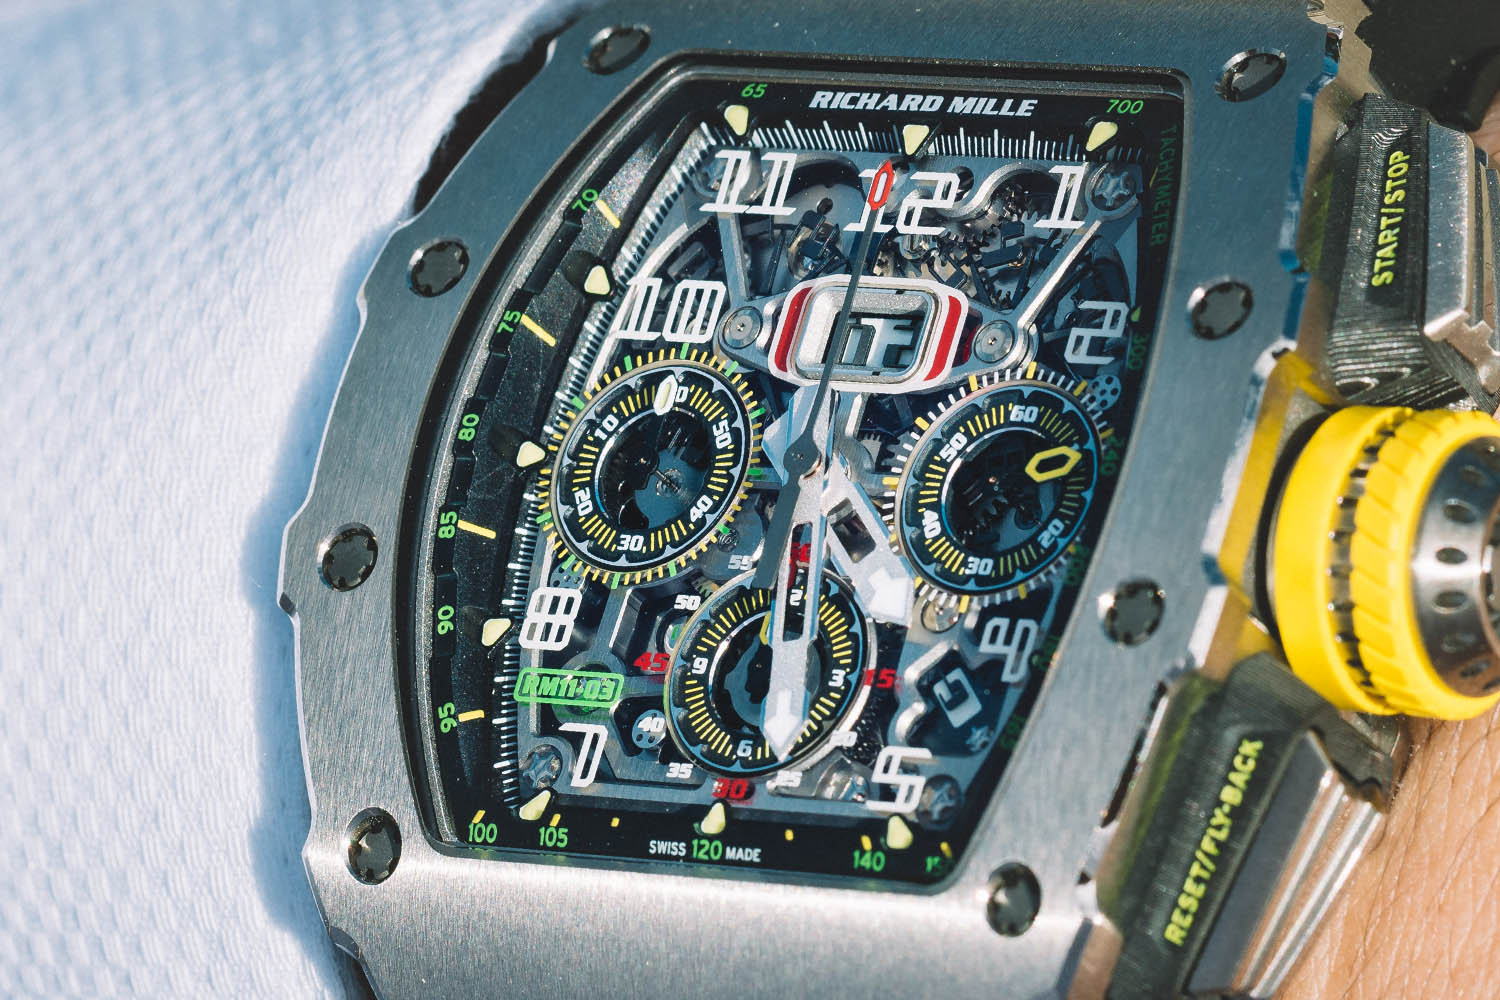 Richard Mille RM 11-03 Automatic Flyback Chronograph (credits: Alex Teuscher)